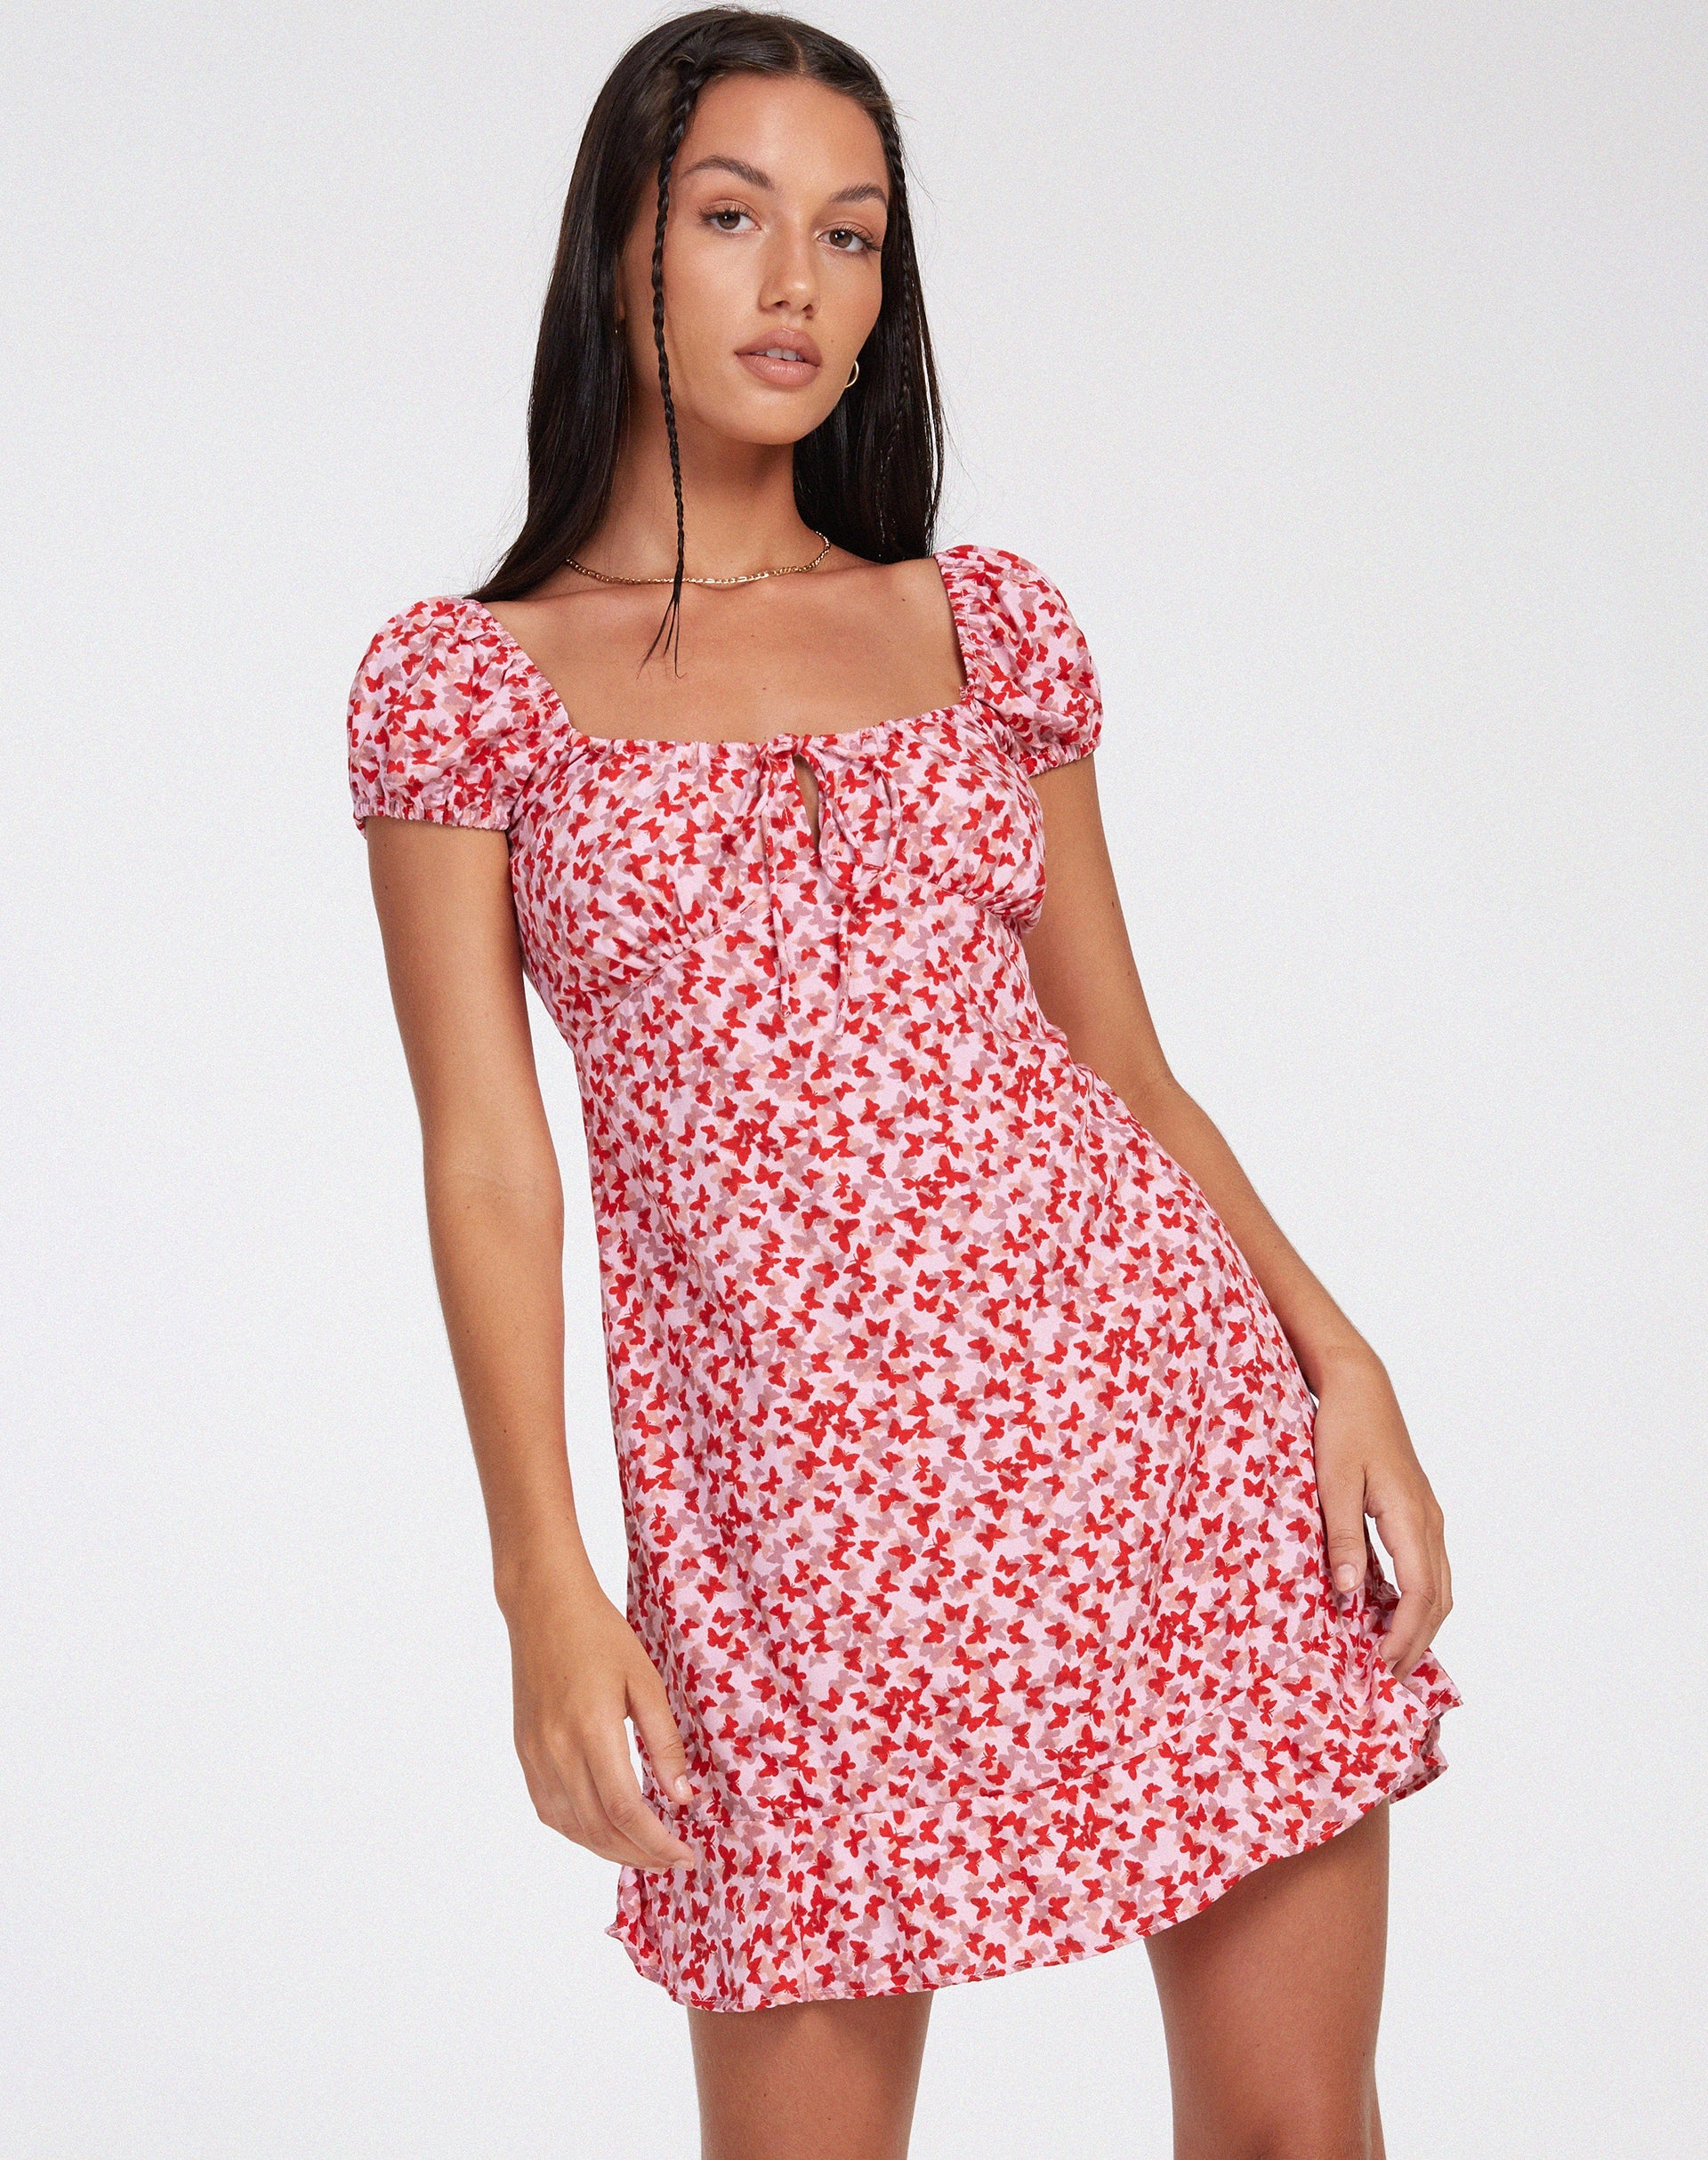 image of Galaca Mini Dress in Ditsy Butterfly Peach and Red